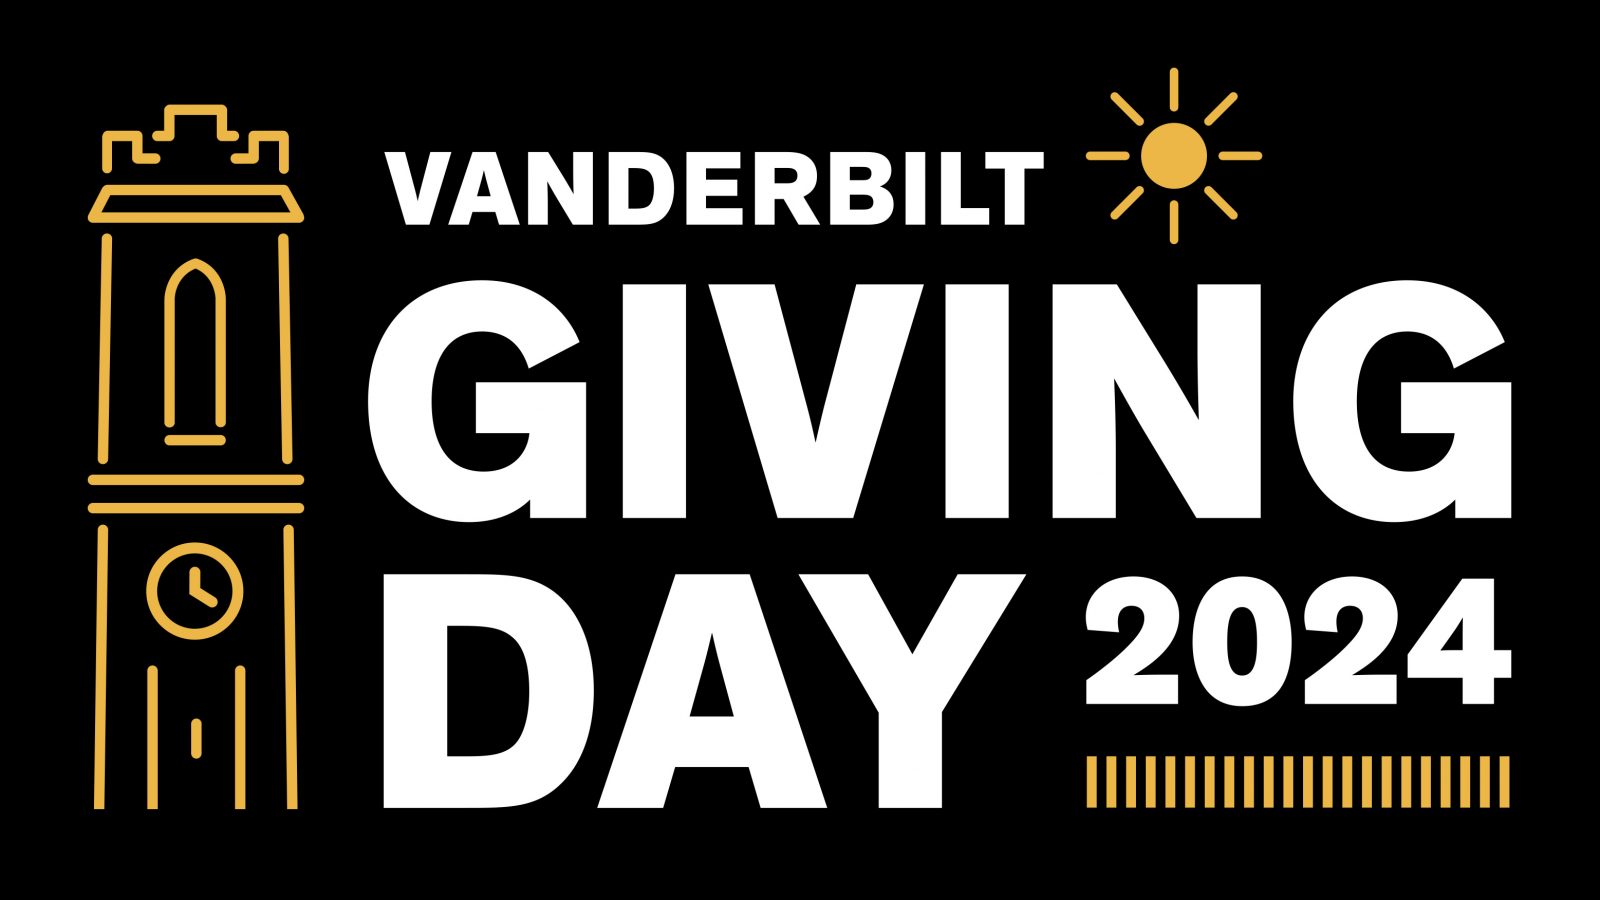 Show your support for Vanderbilt today and join the fun on Giving Day on April 11 [Video]